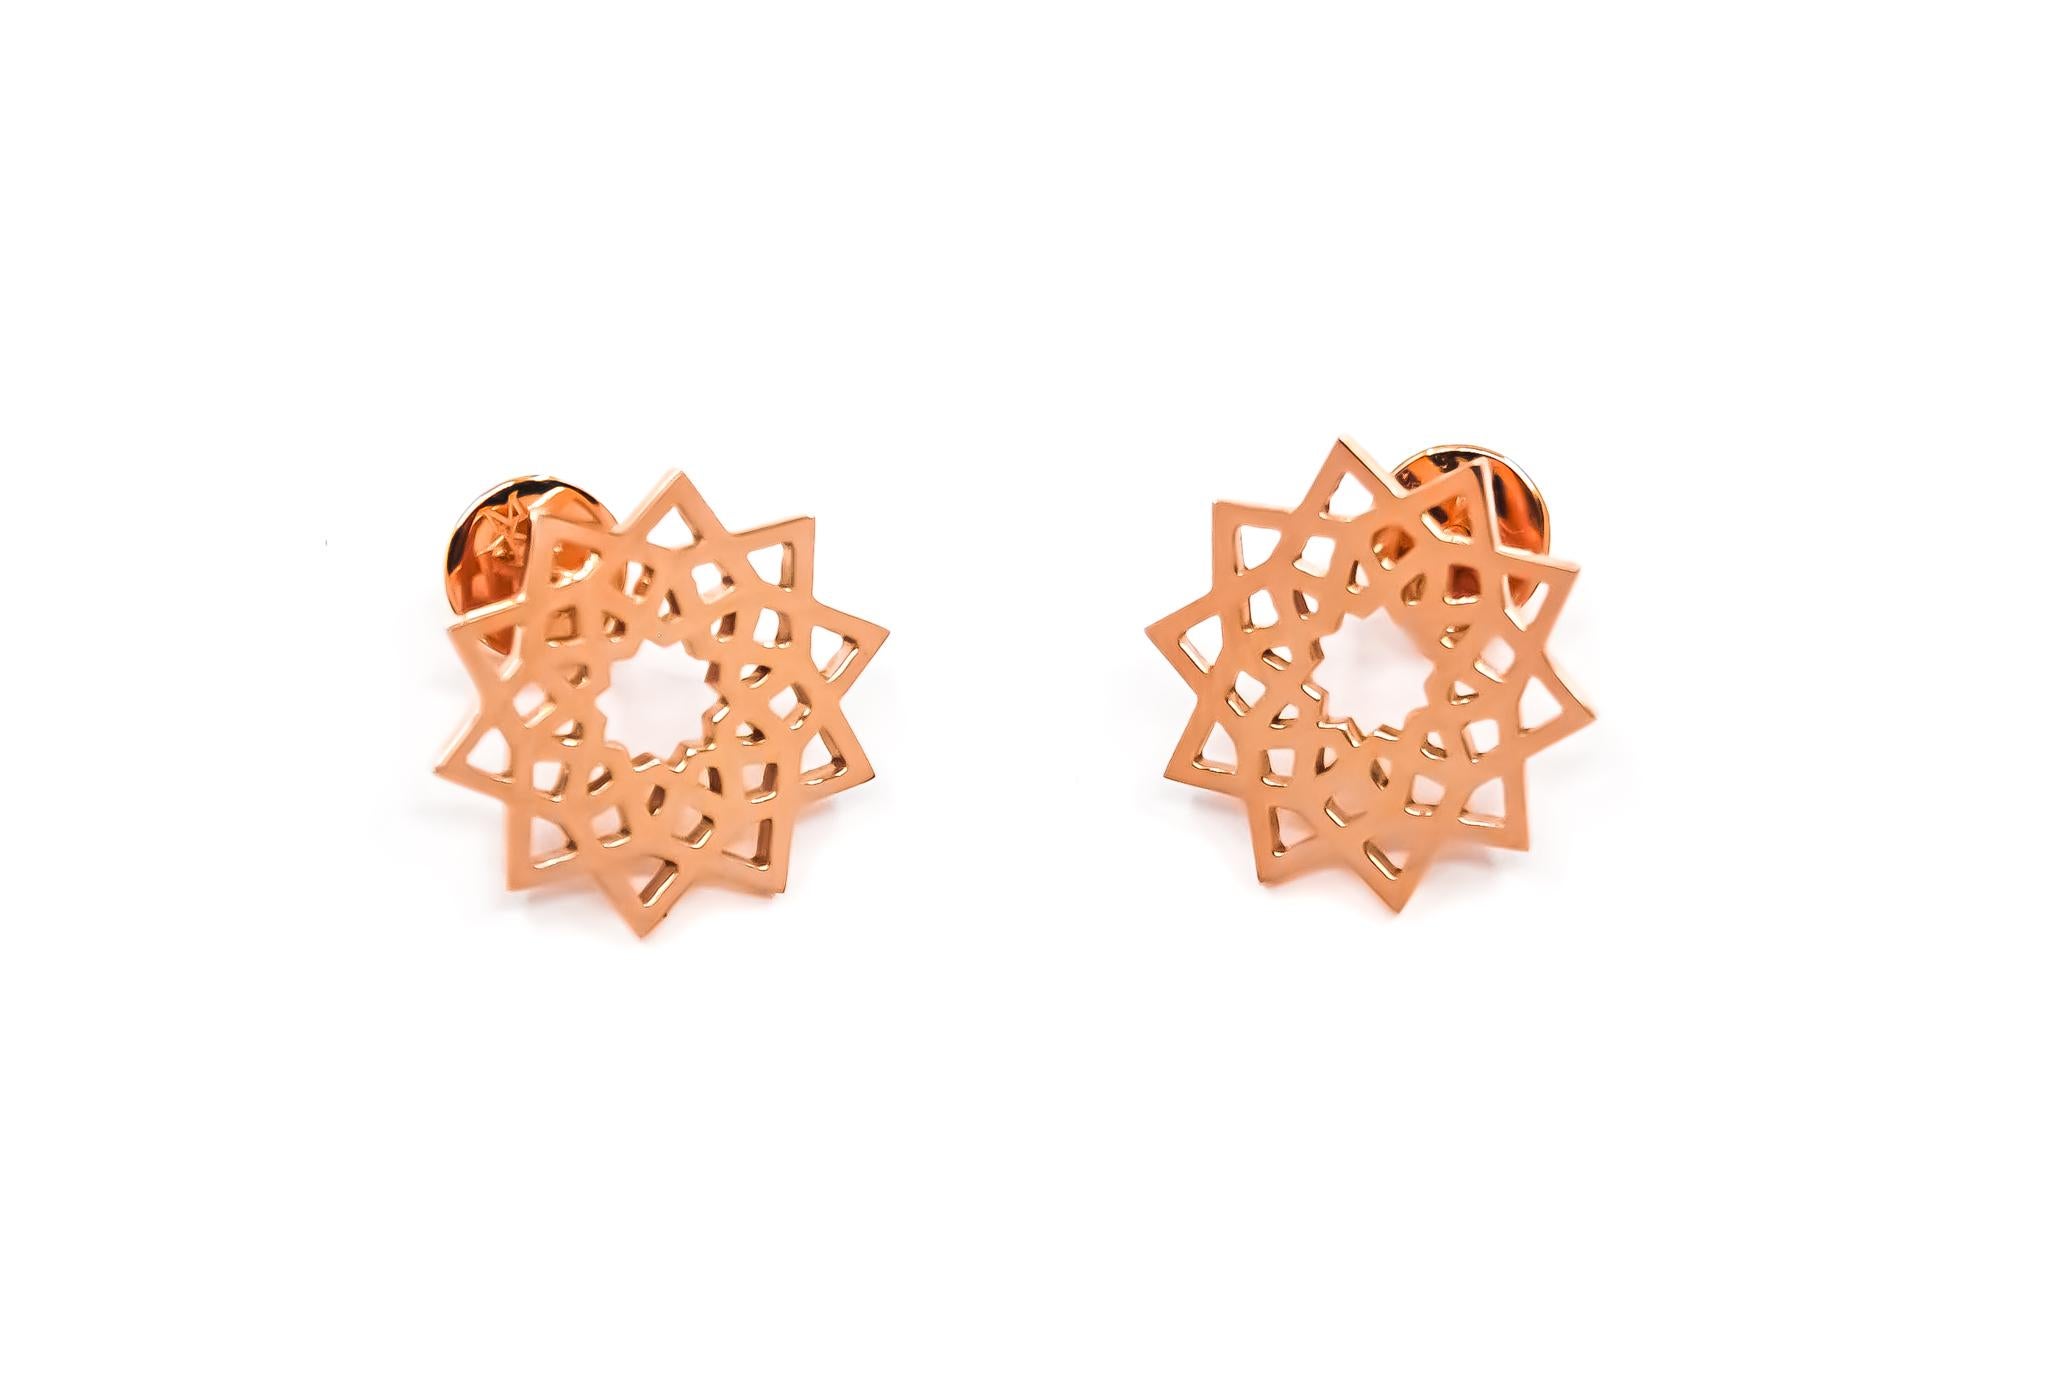 Arabesque Deco Andalusian Style Stud Earrings in 18kt Rose Gold In New Condition For Sale In Dubai, AE